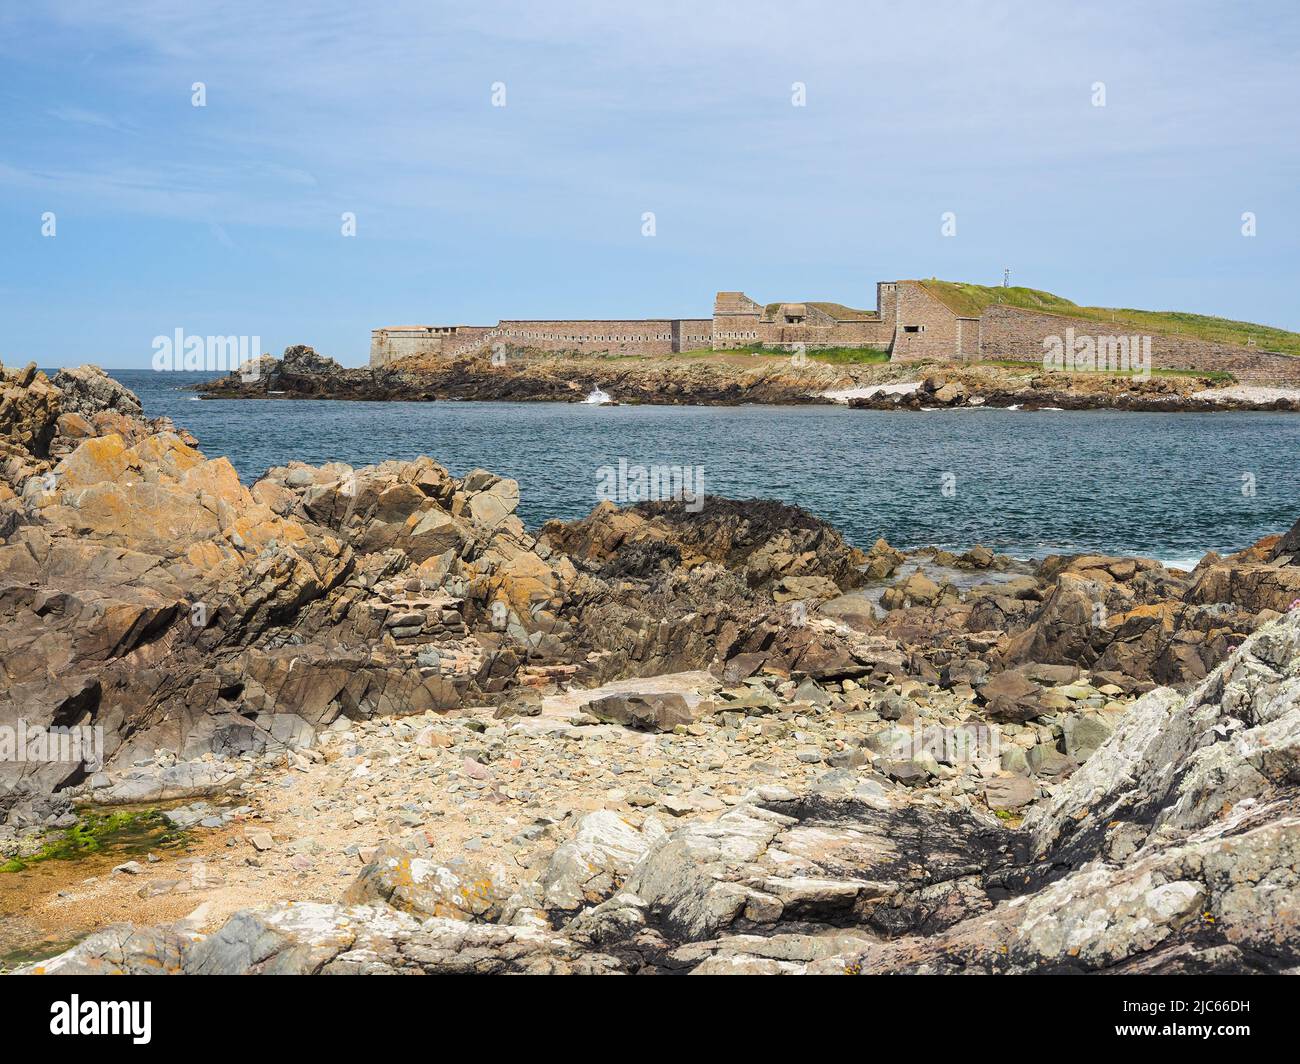 View across rocky bay to Fort Grosnez from Fort Doyle, Alderney, Channel Islands Stock Photo